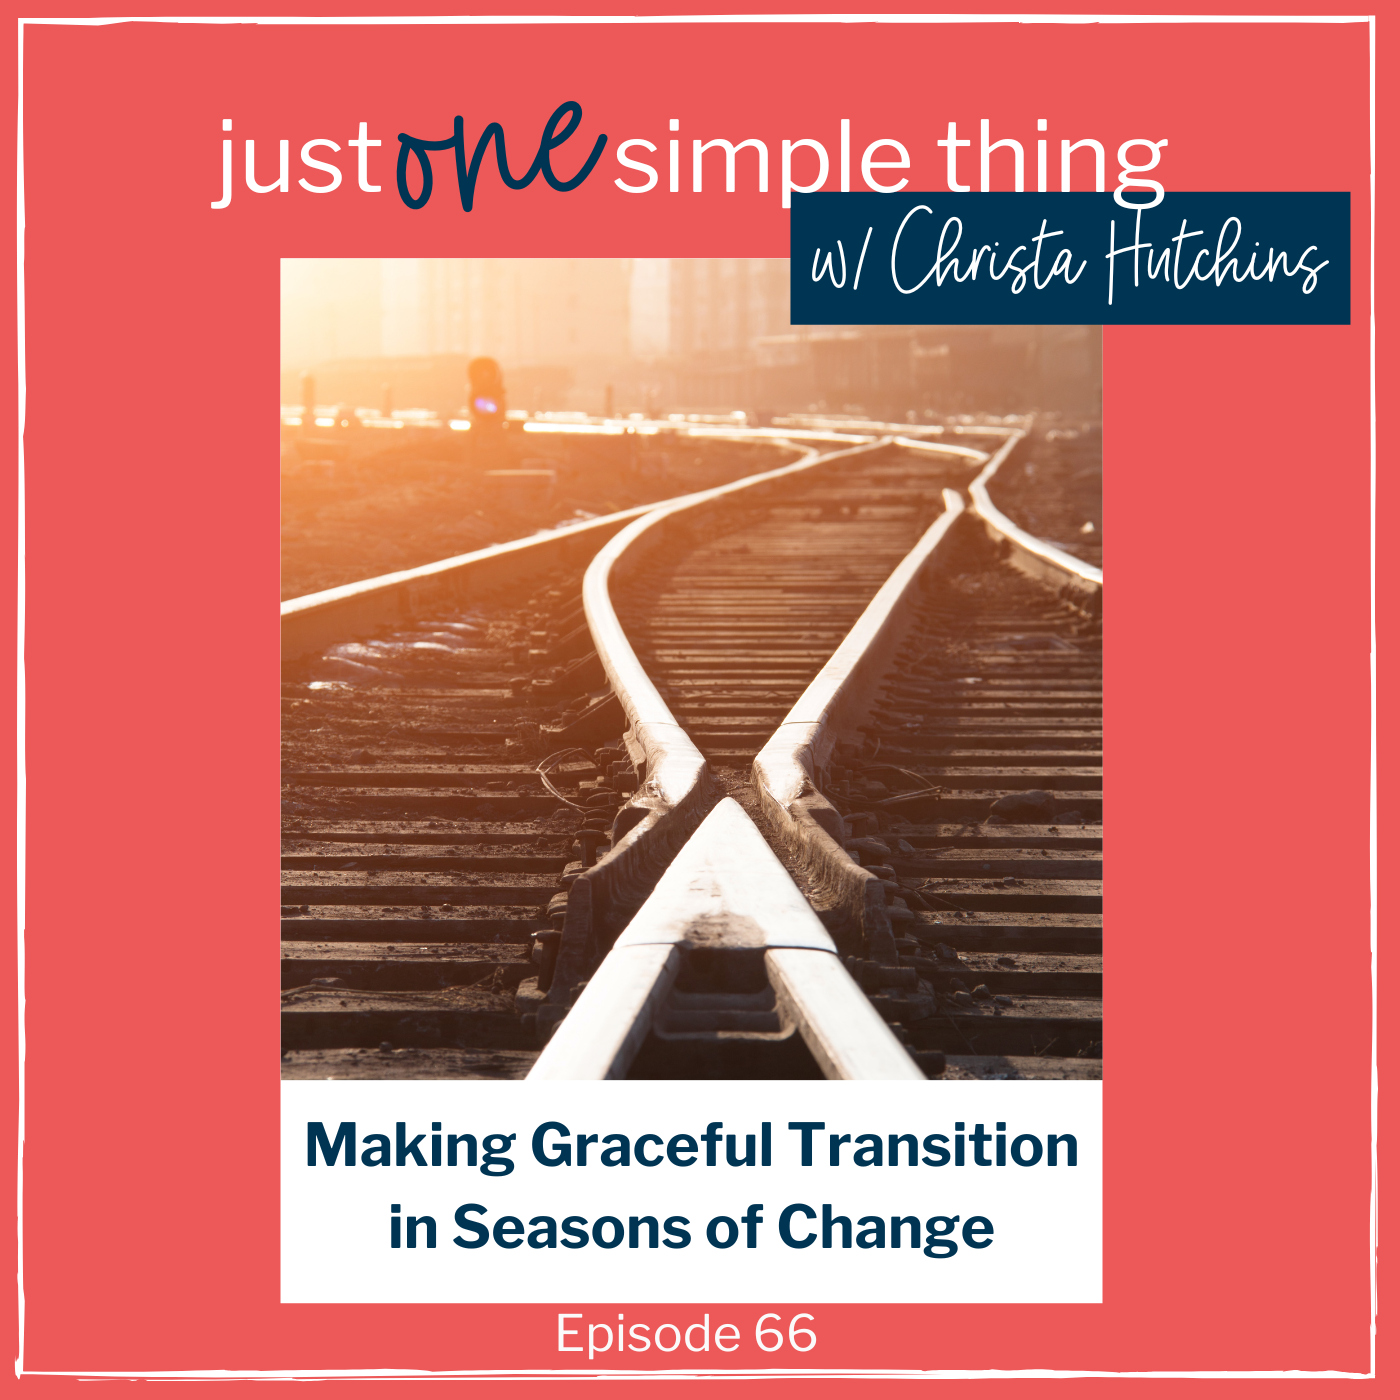 Making Graceful Transitions in Seasons of Change